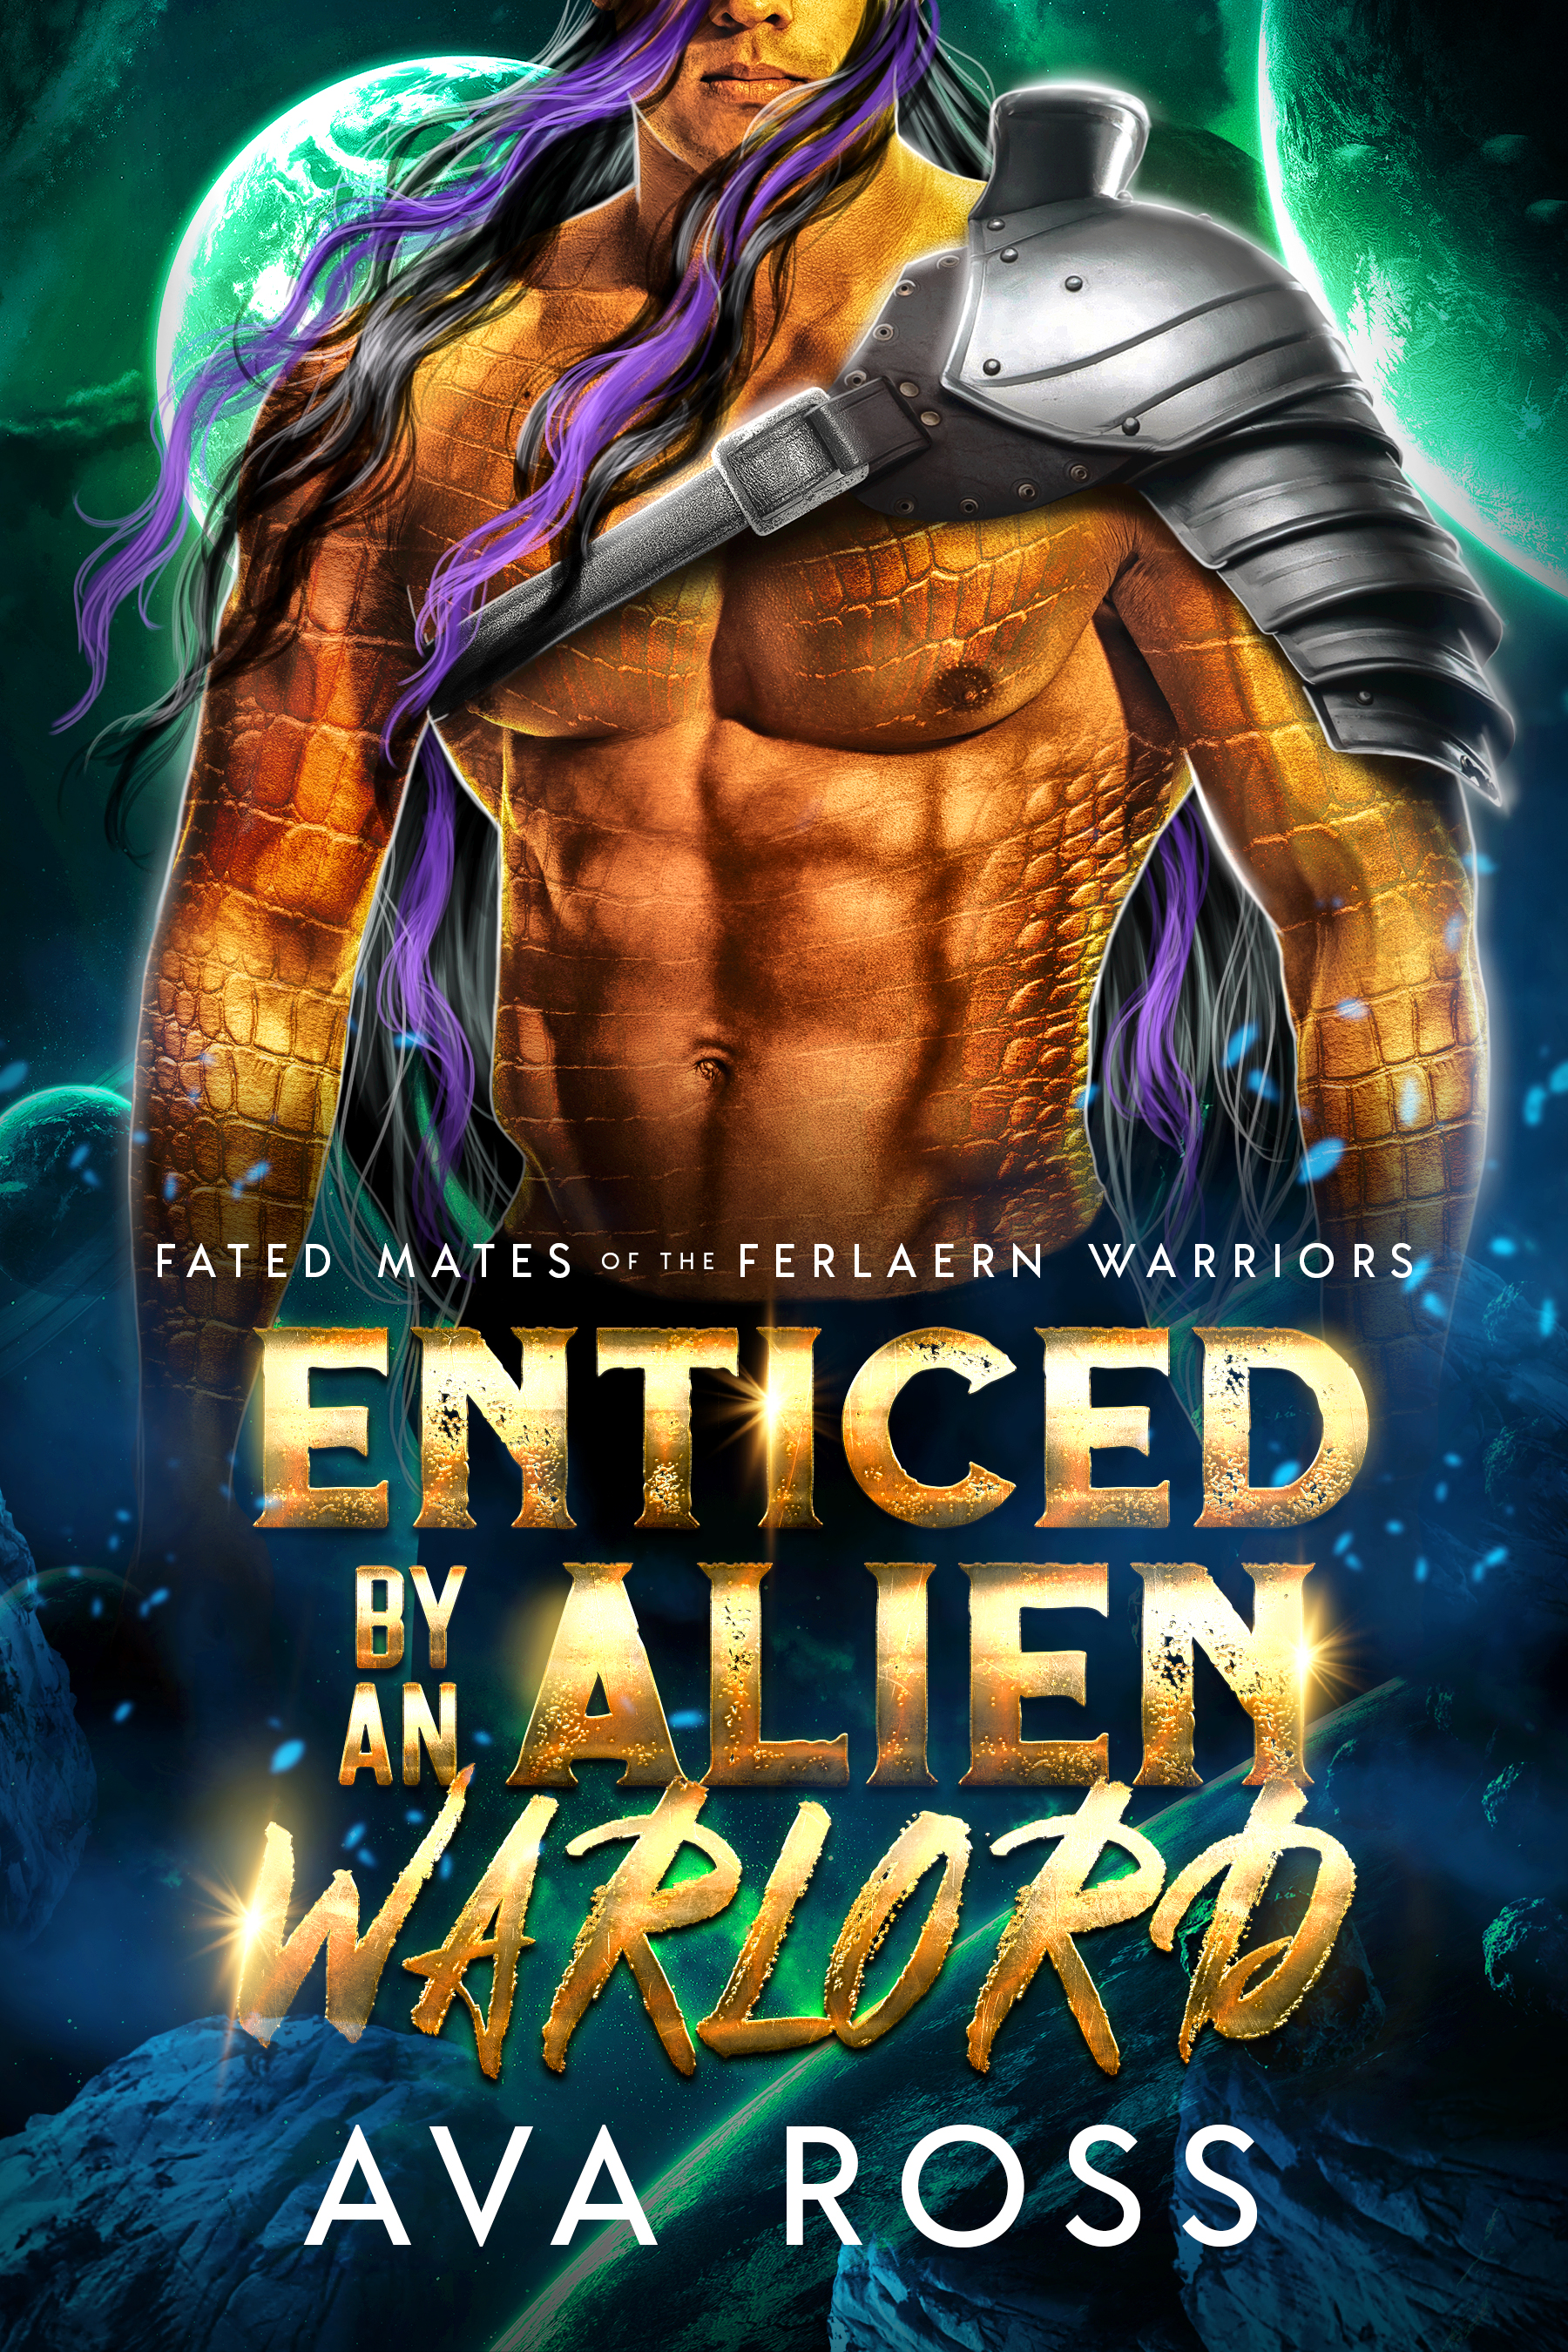 Fated Mates of the Ferlaern Warriors 1.0 - Enticed By an Alien Warlord by Ava Ross